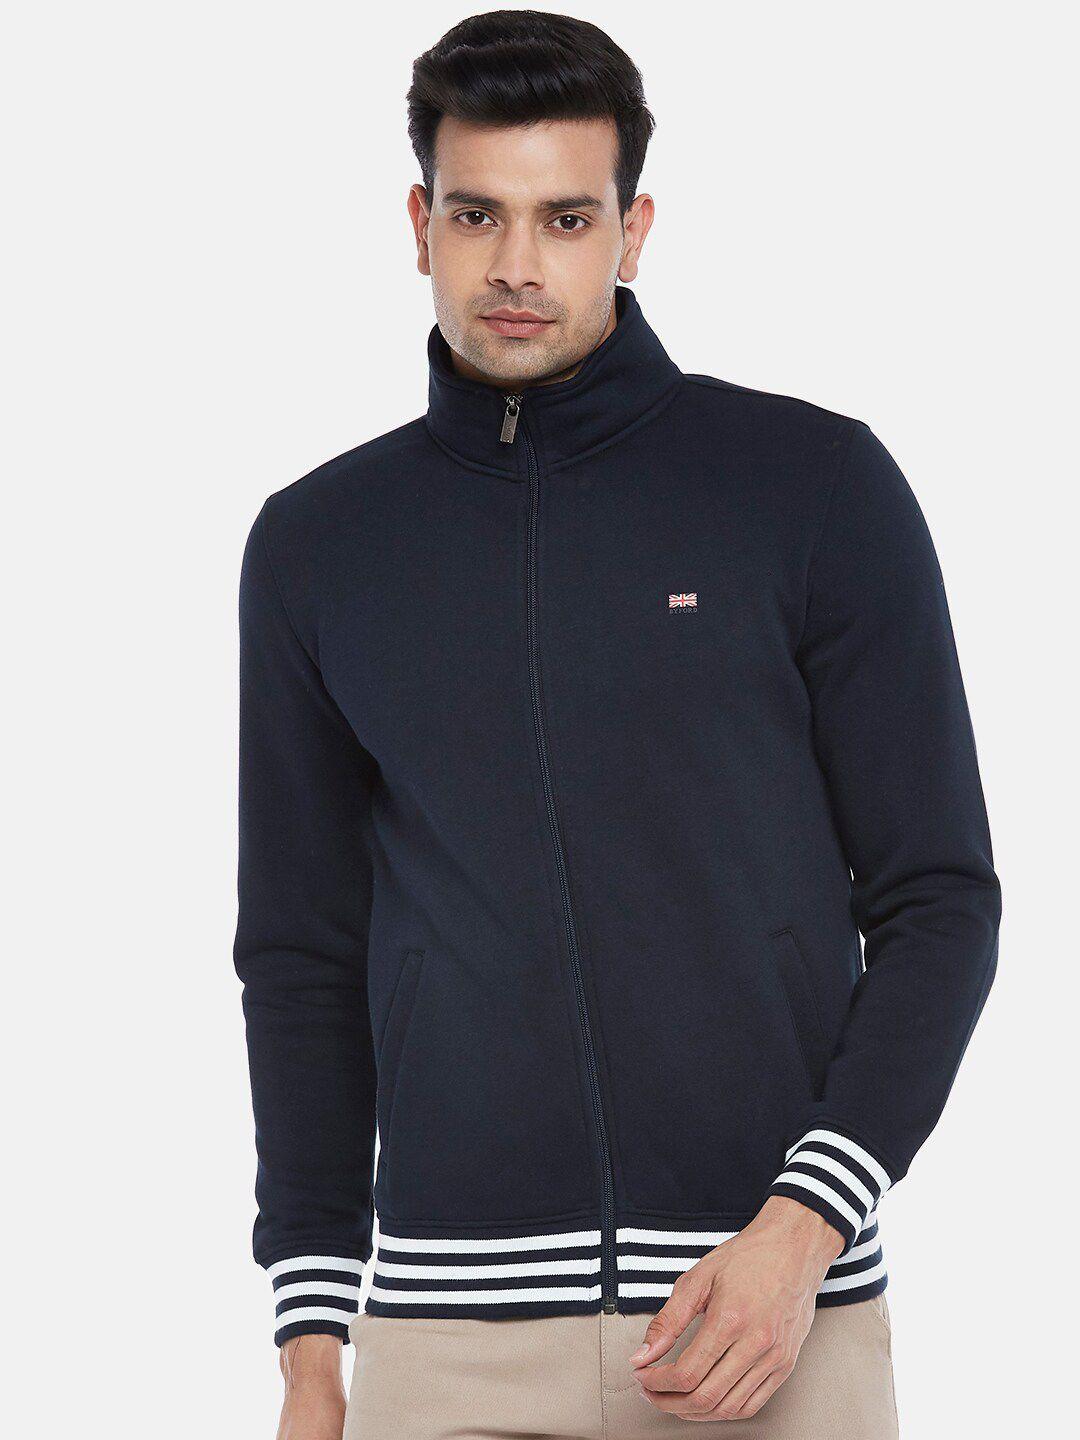 byford by pantaloons men navy blue front-open sweatshirt